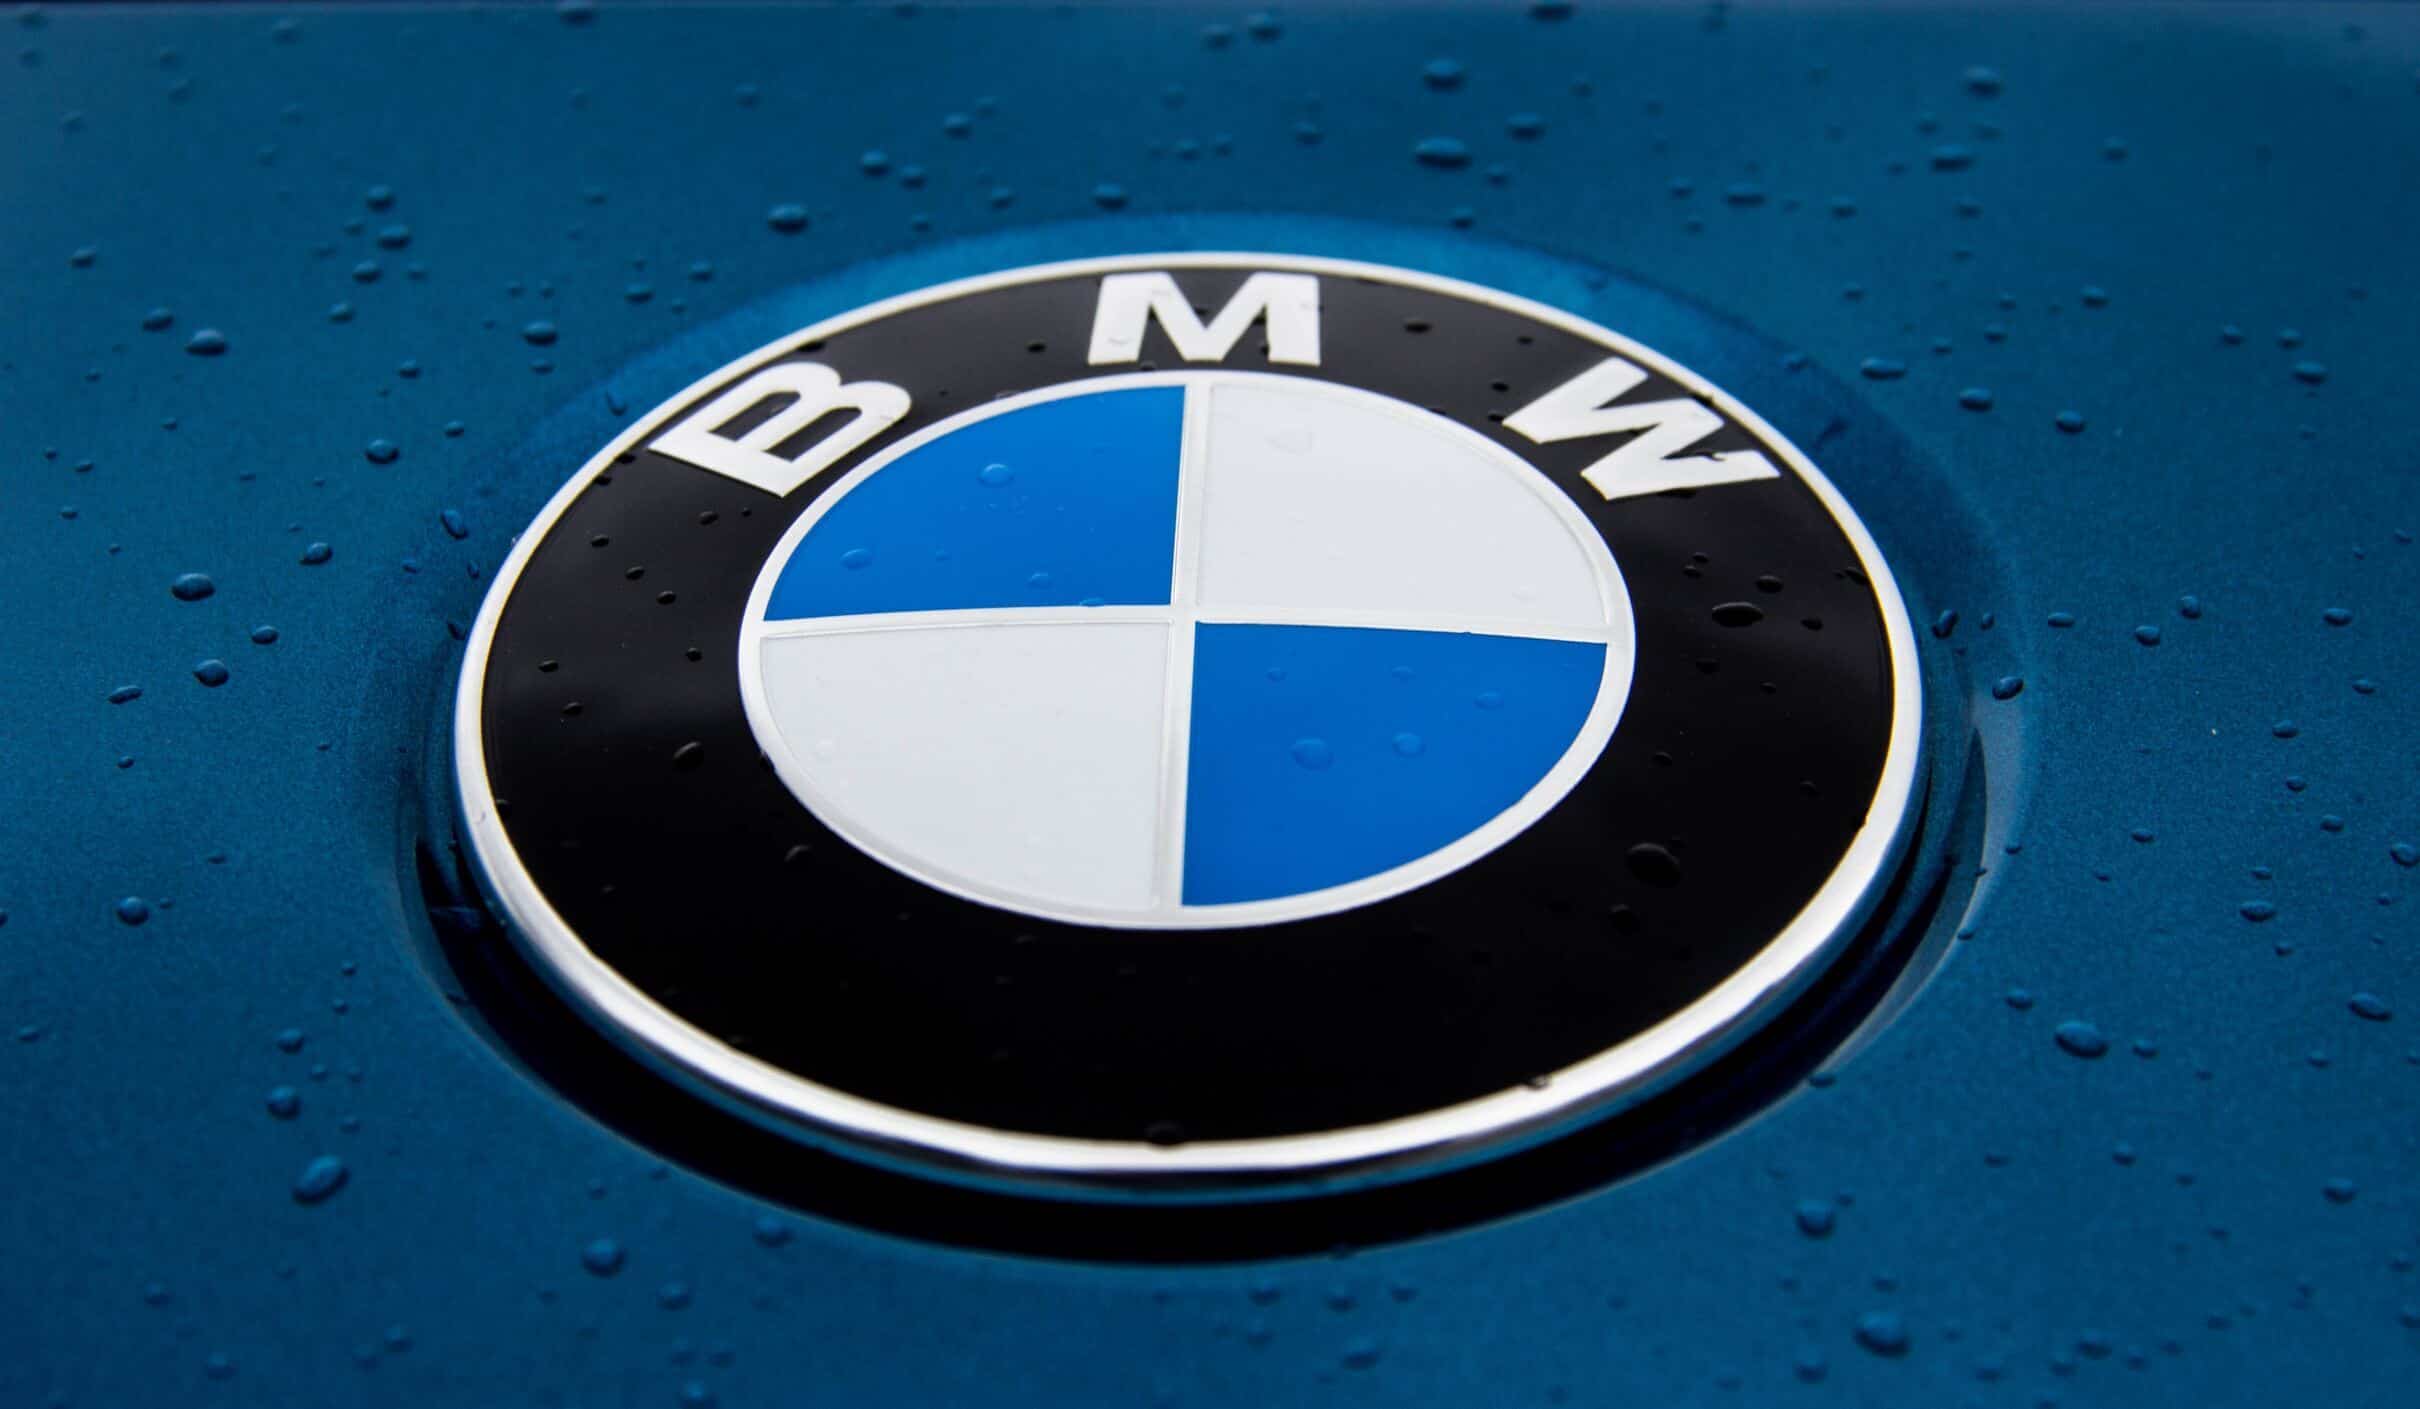 A close-up view of the iconic BMW logo badge, showcasing the blue and white roundel with black lettering.